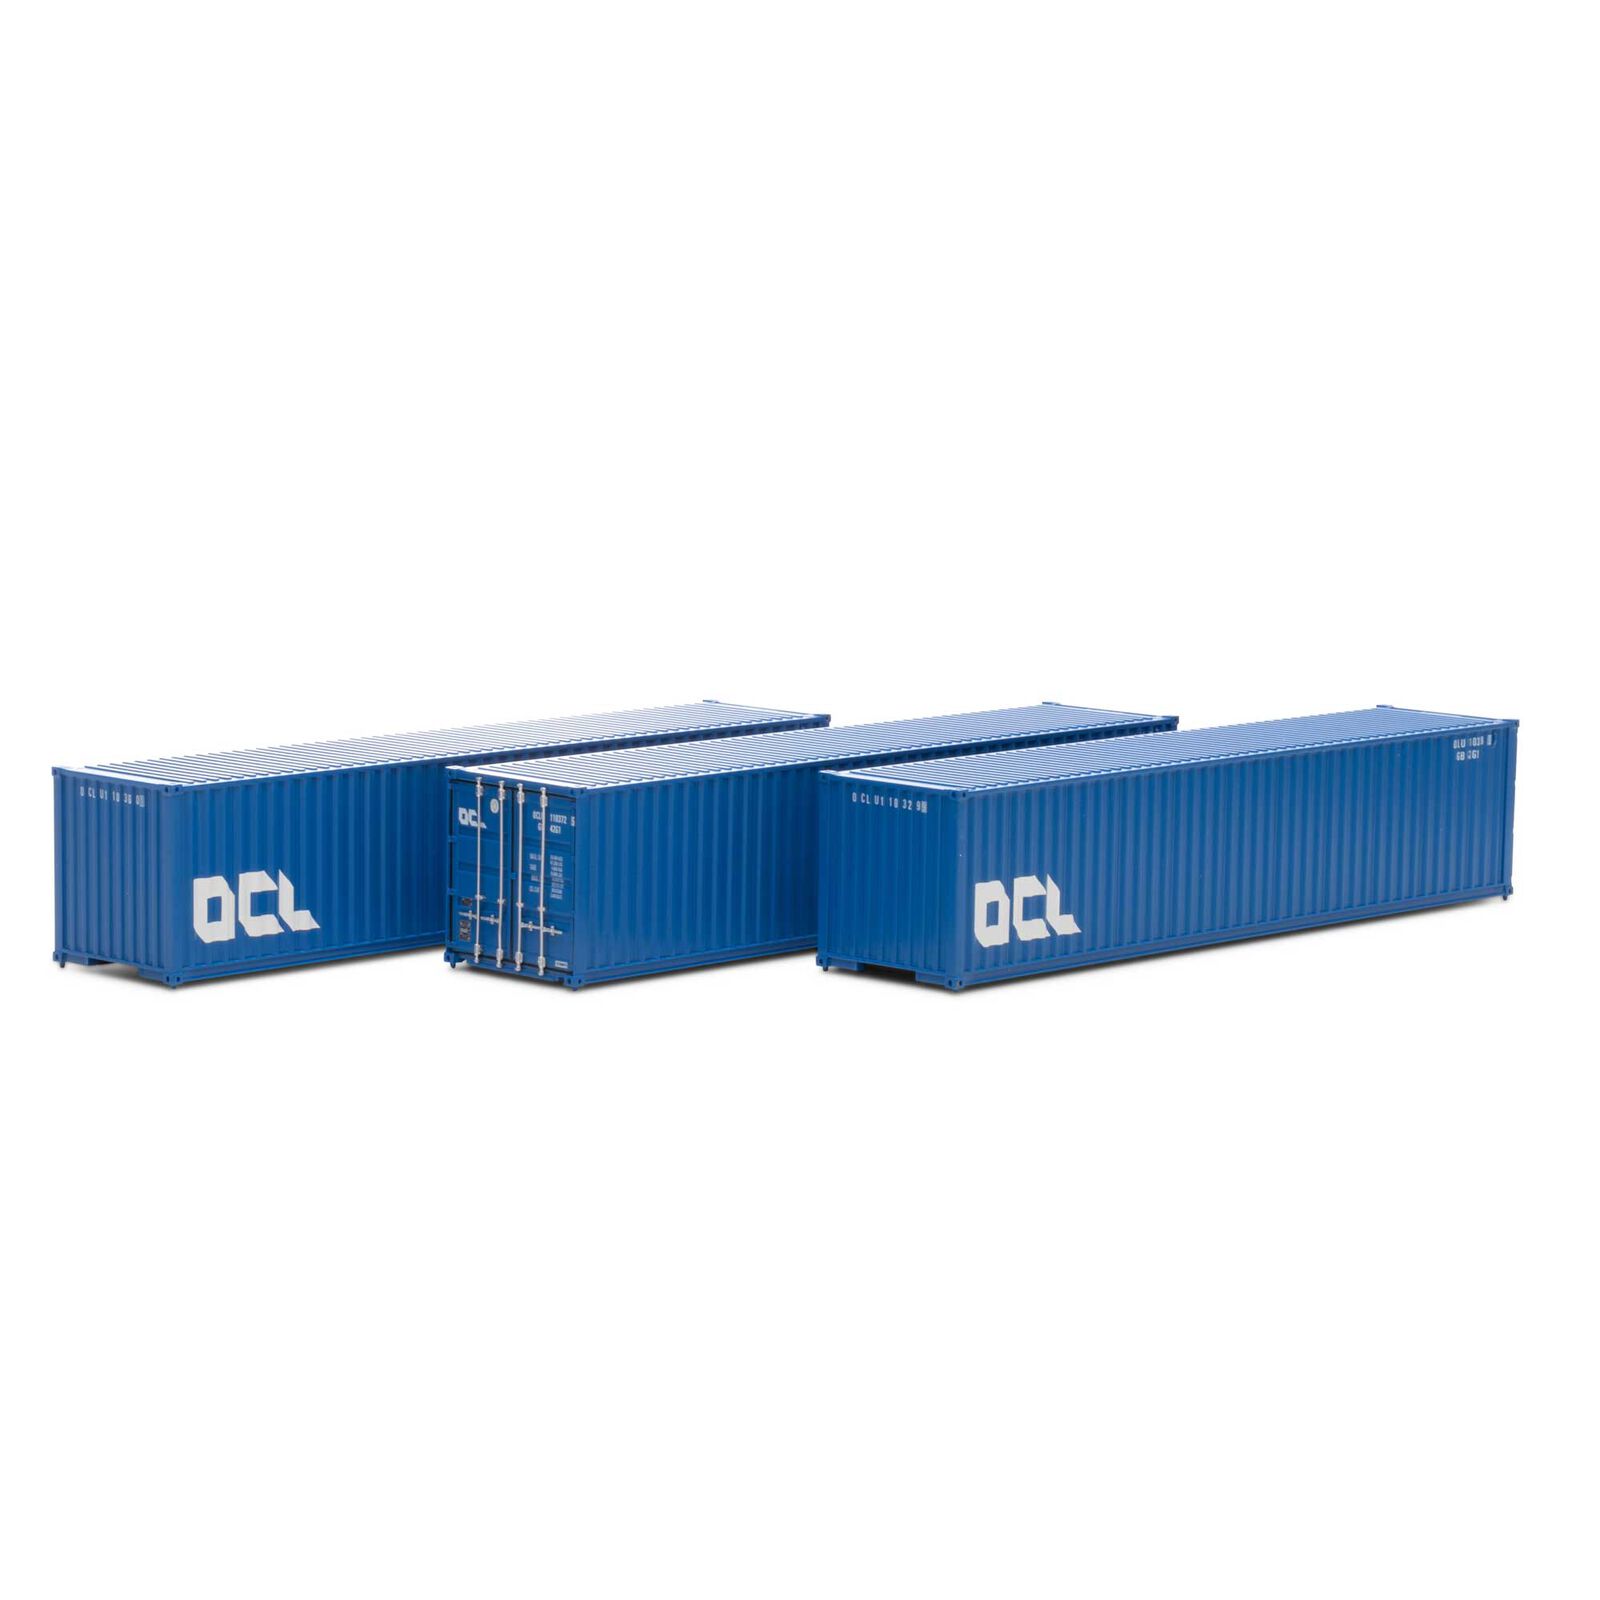 Athearn RTR 27058 - HO 40ft Corrugated LC Container - OCL #2 (3pk)